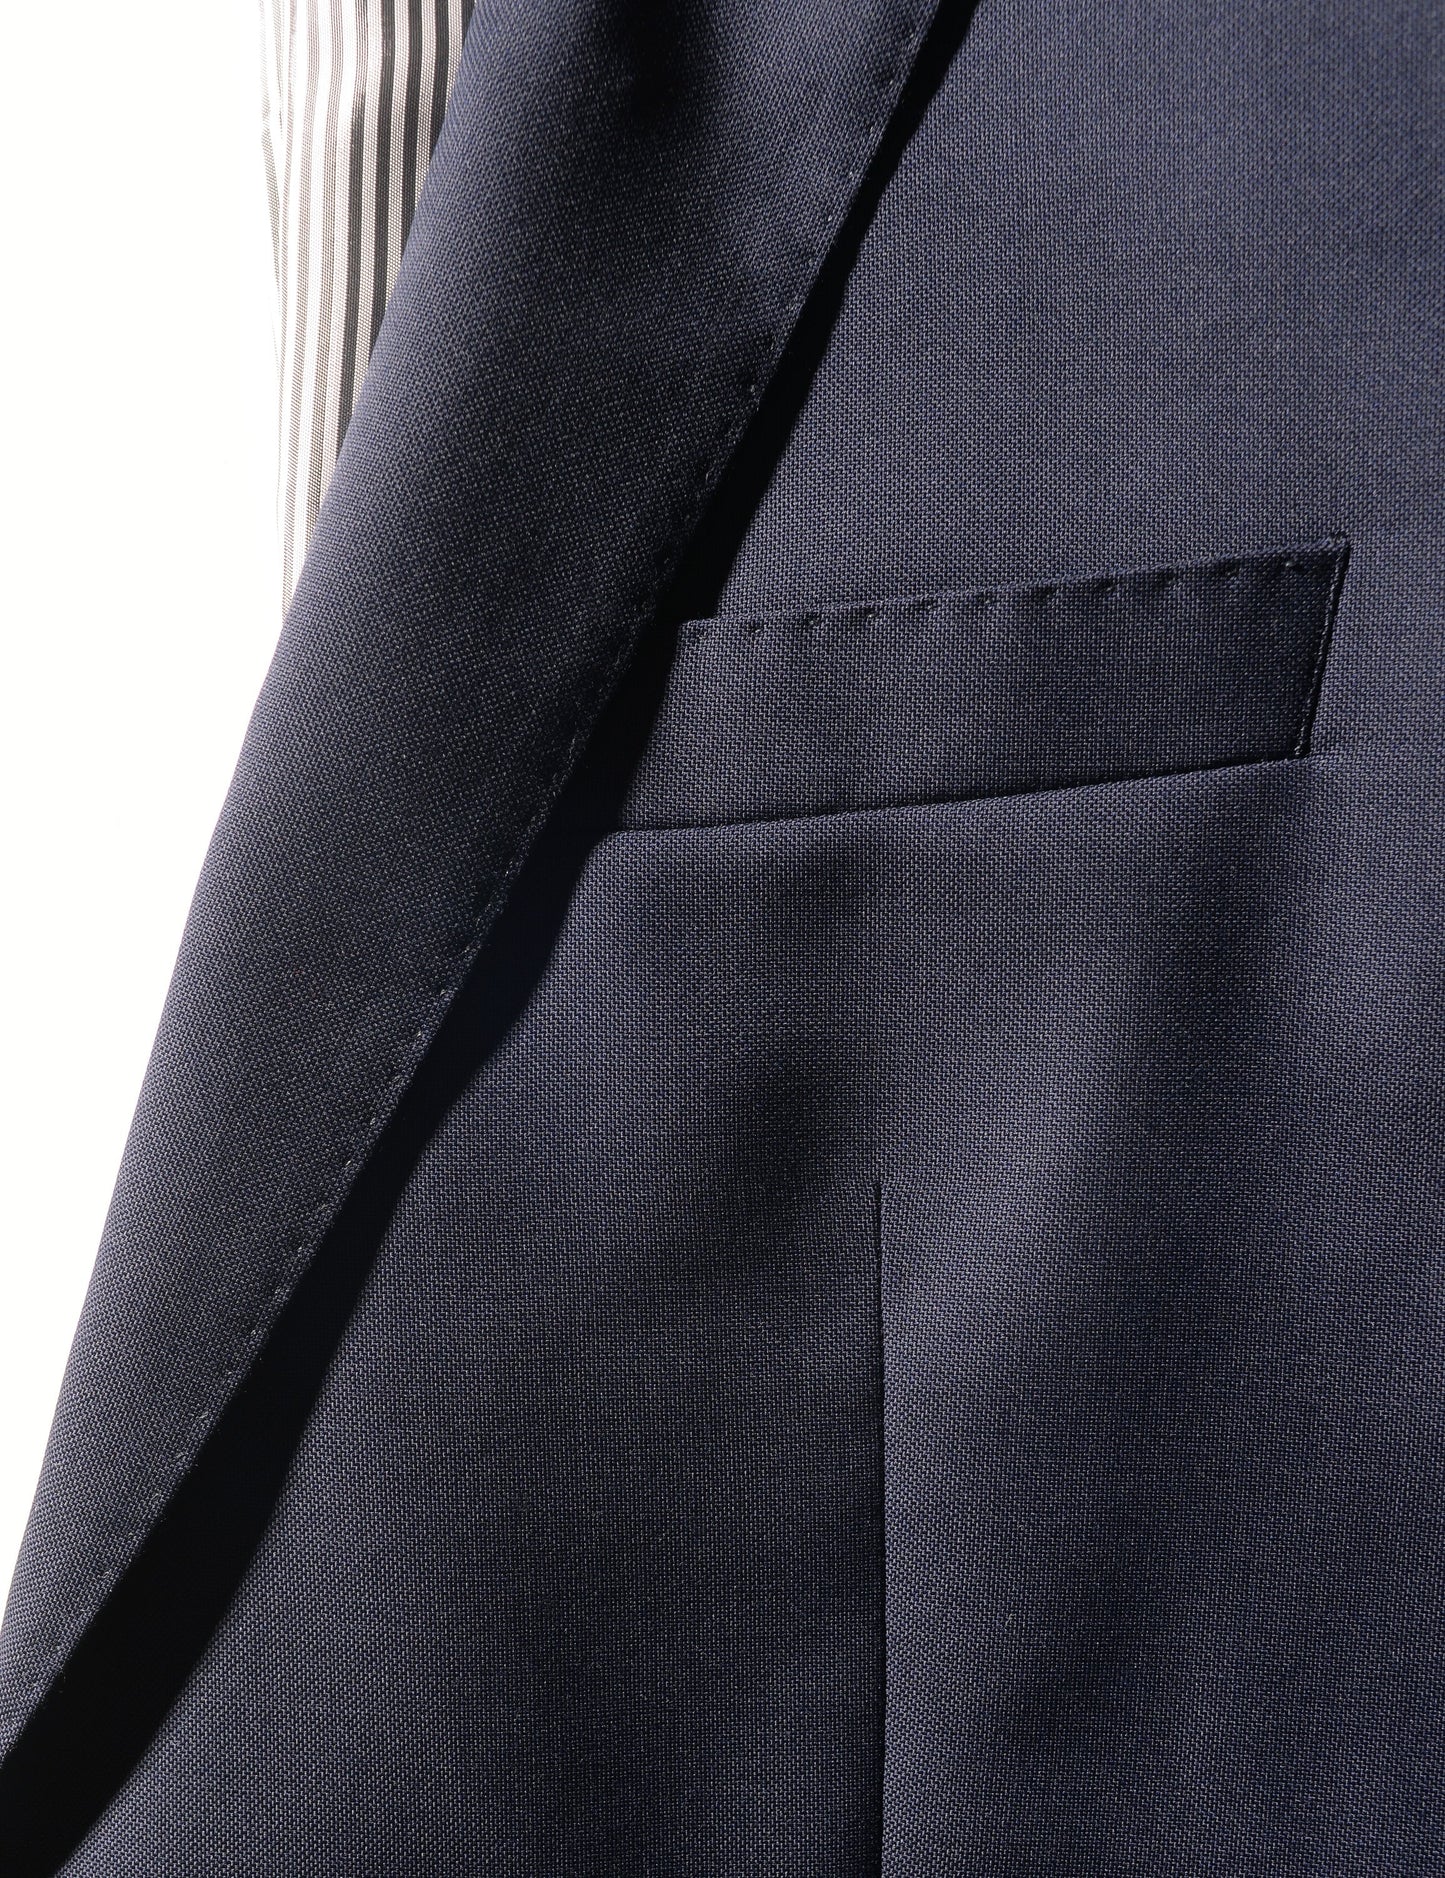 Detail shot of Brooklyn Tailors 2020 Version BKT50 Tailored Jacket in Super 110s Plainweave - Classic Navy lapel and chest pocket